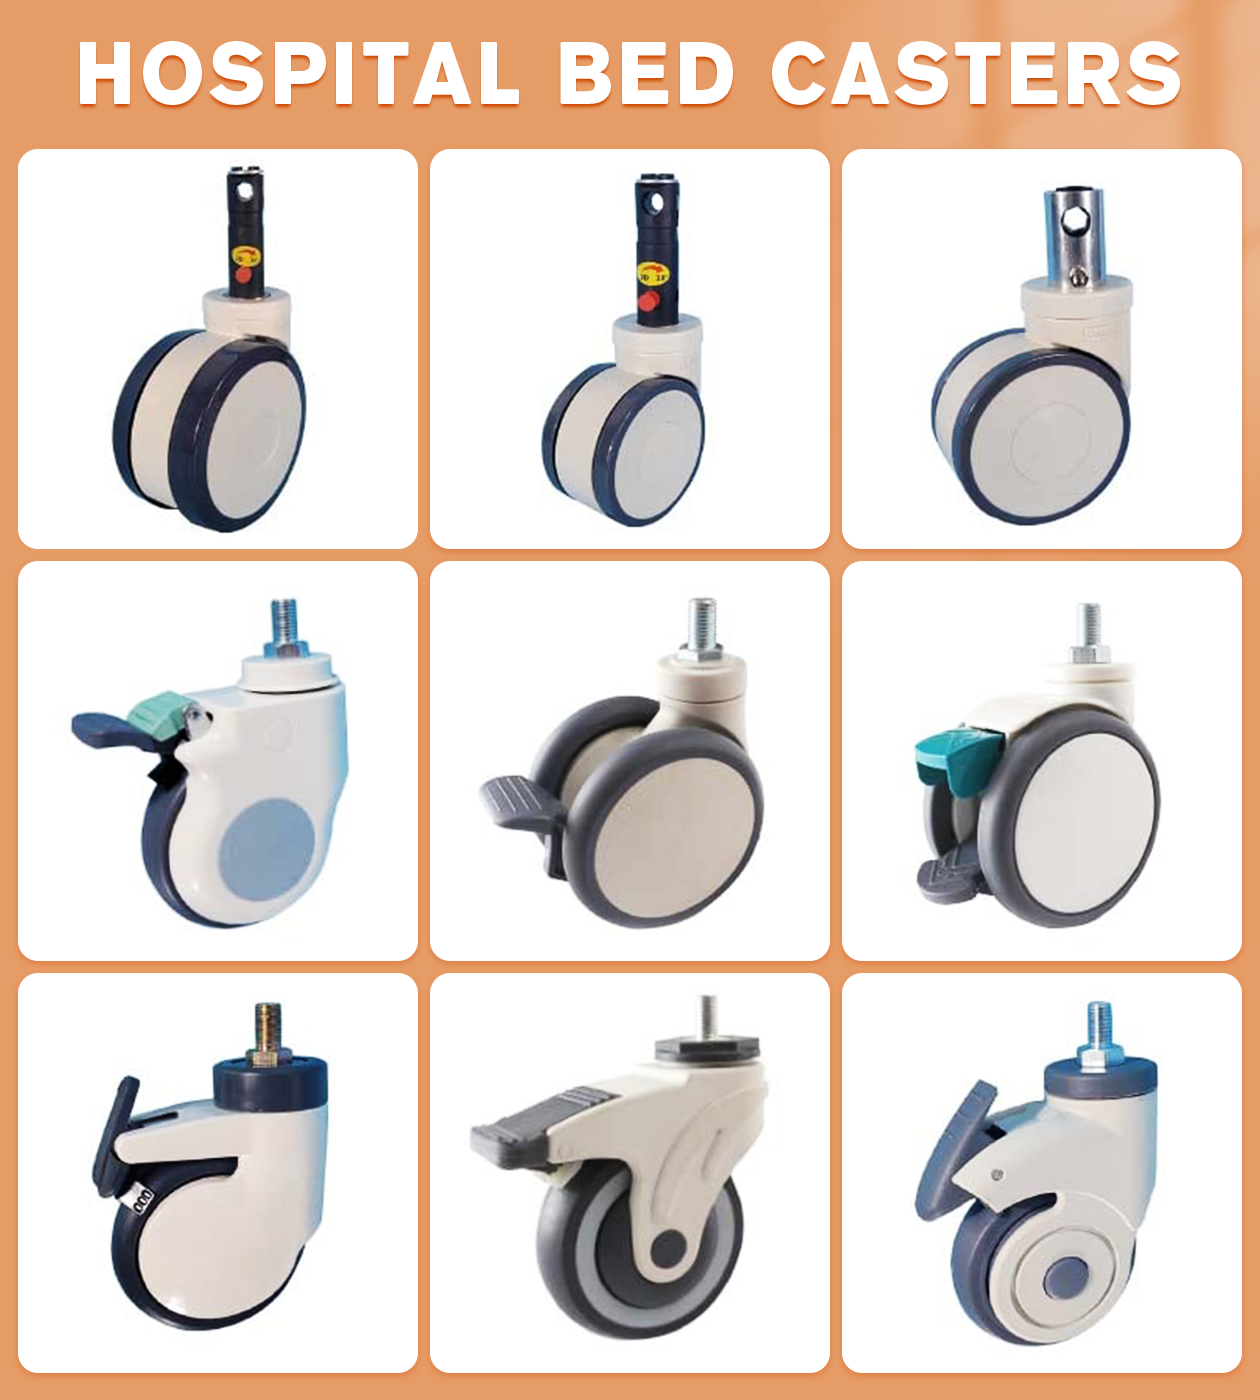 Medical bed accessories – what factors need to be considered when choosing casters?